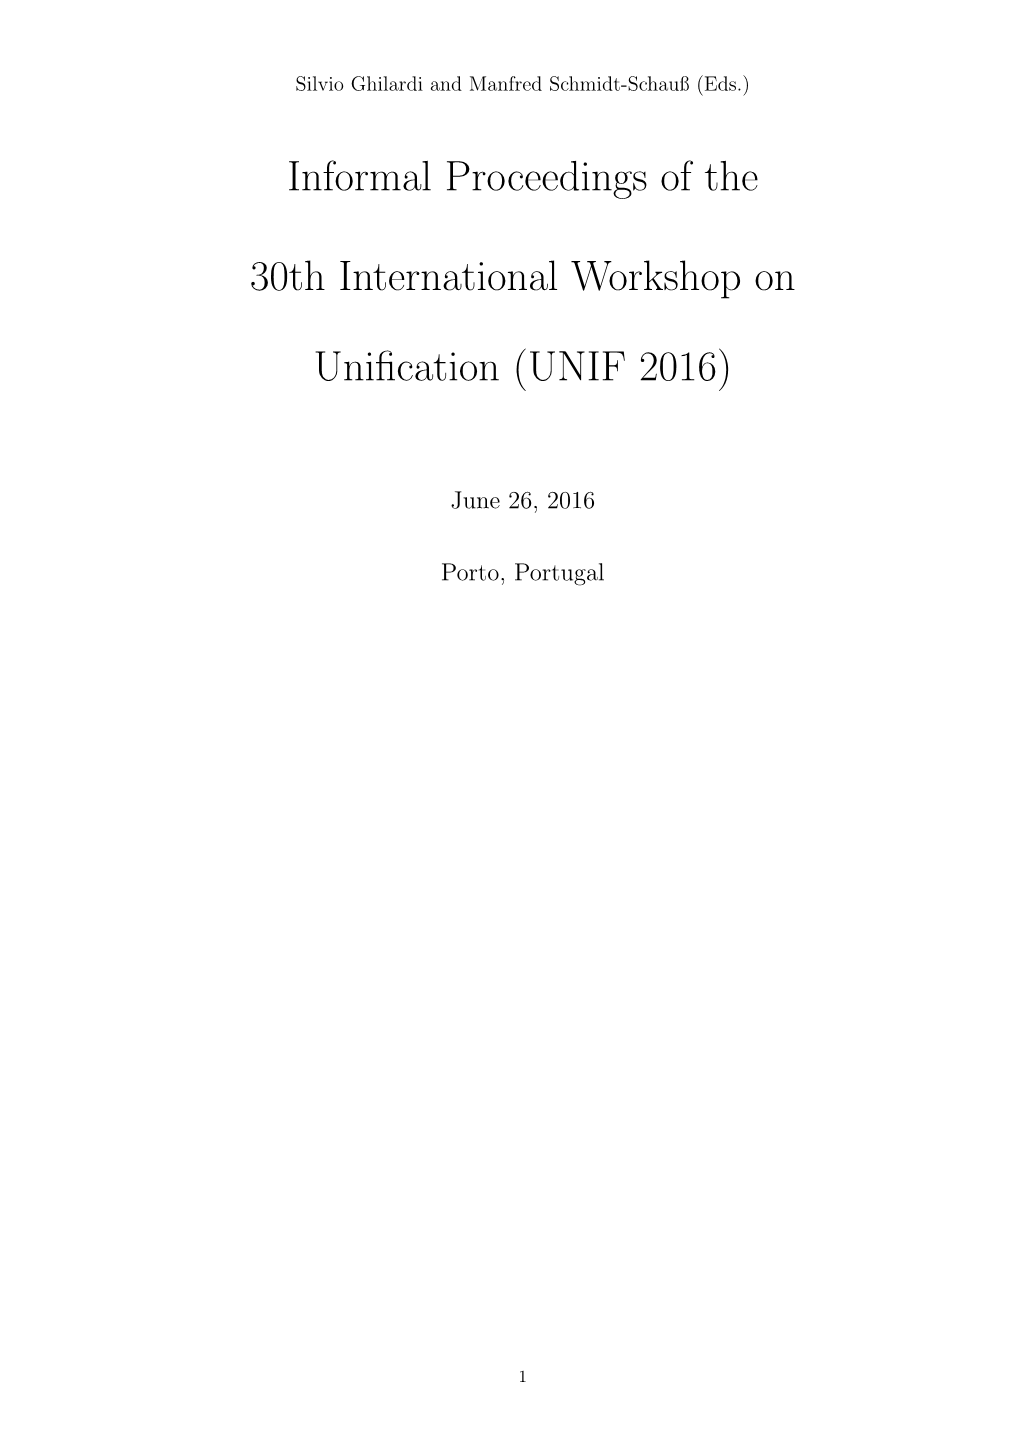 Informal Proceedings of the 30Th International Workshop on Unification (UNIF 2016)